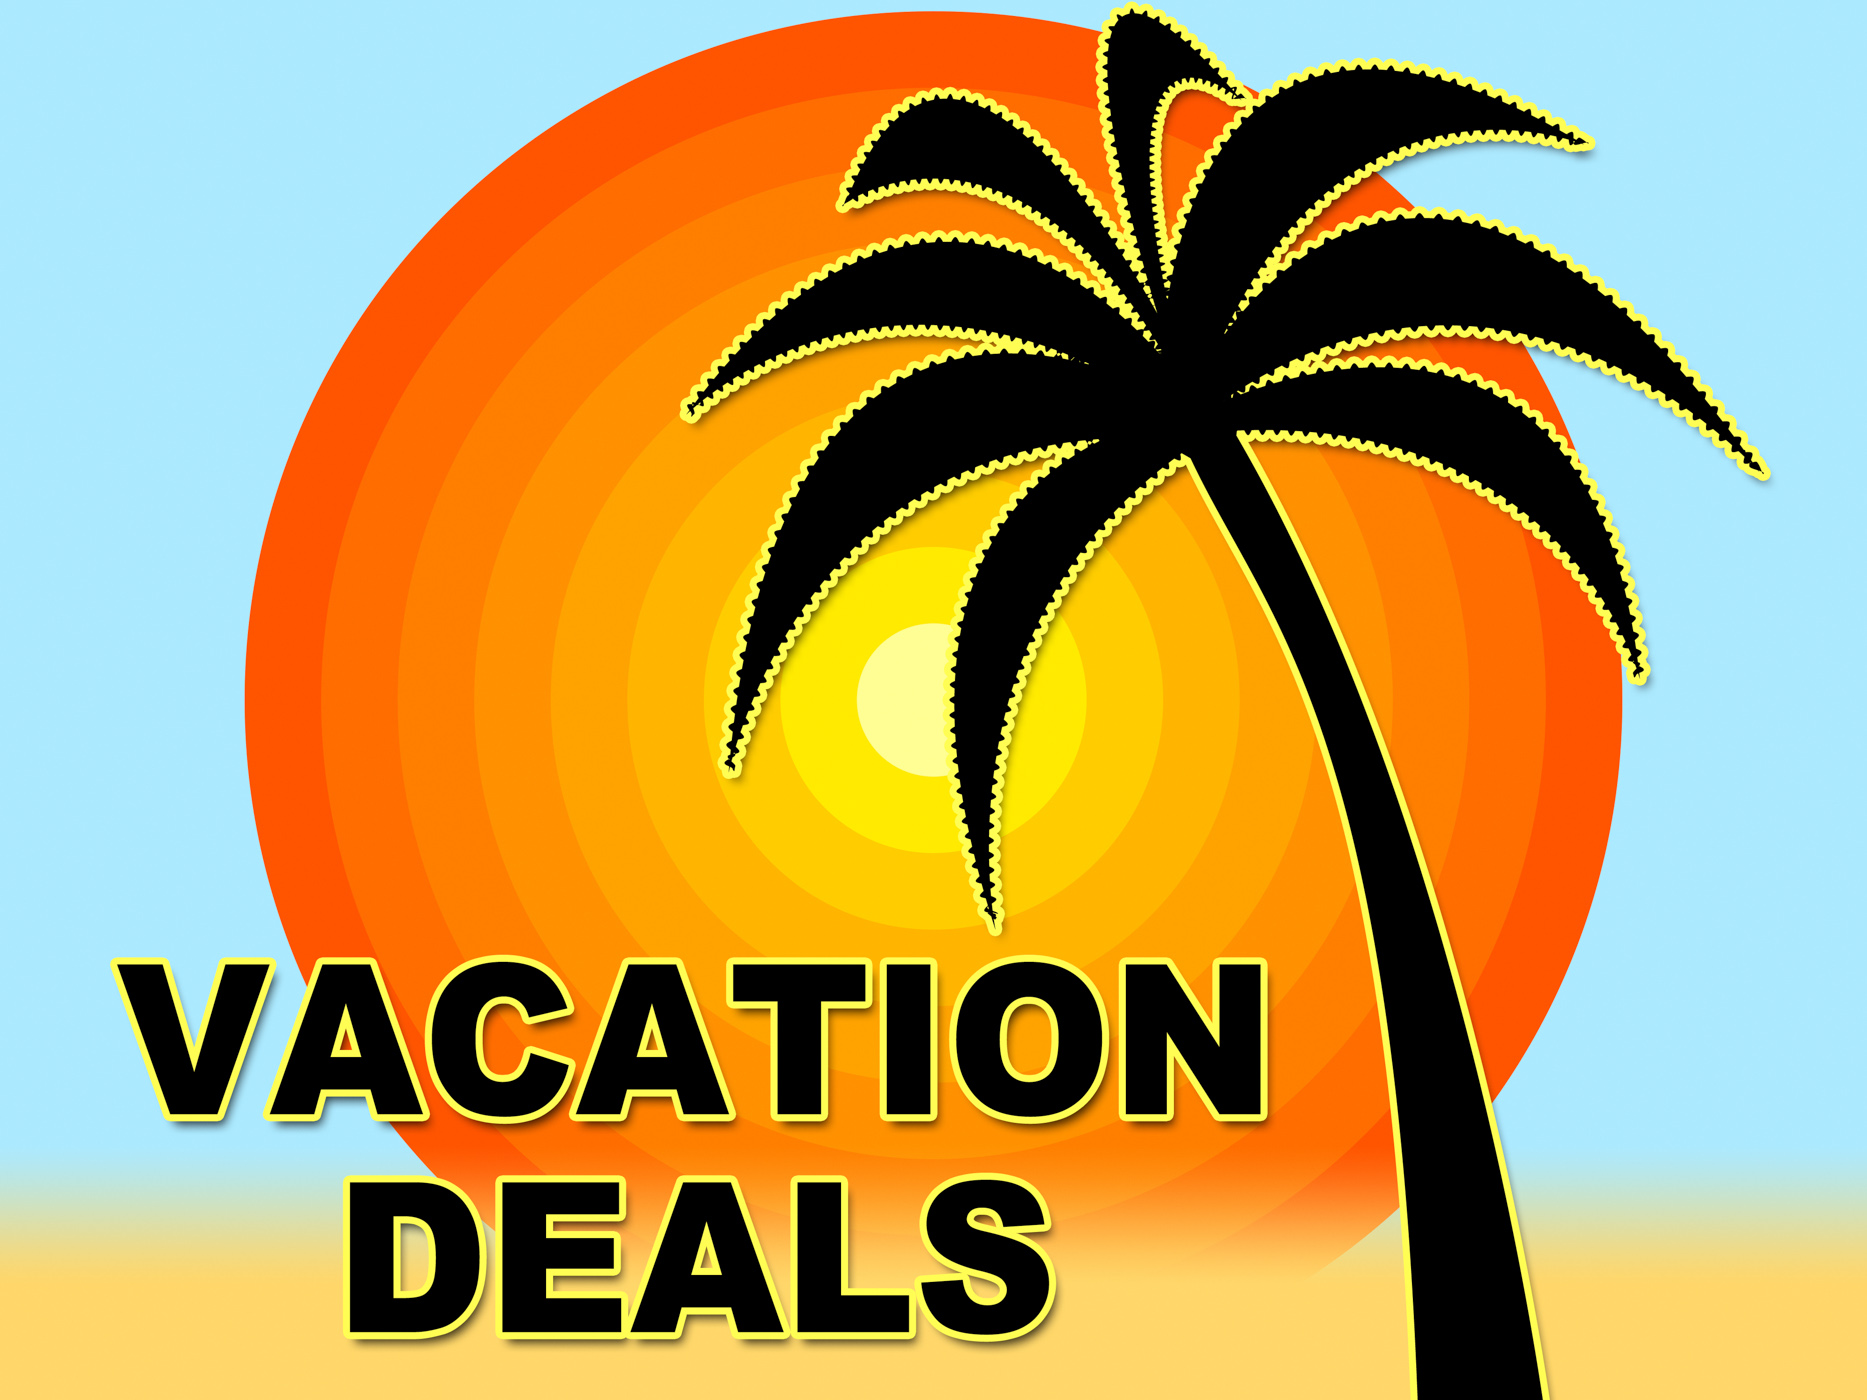 Vacation deals shows getaway discount and sale photo